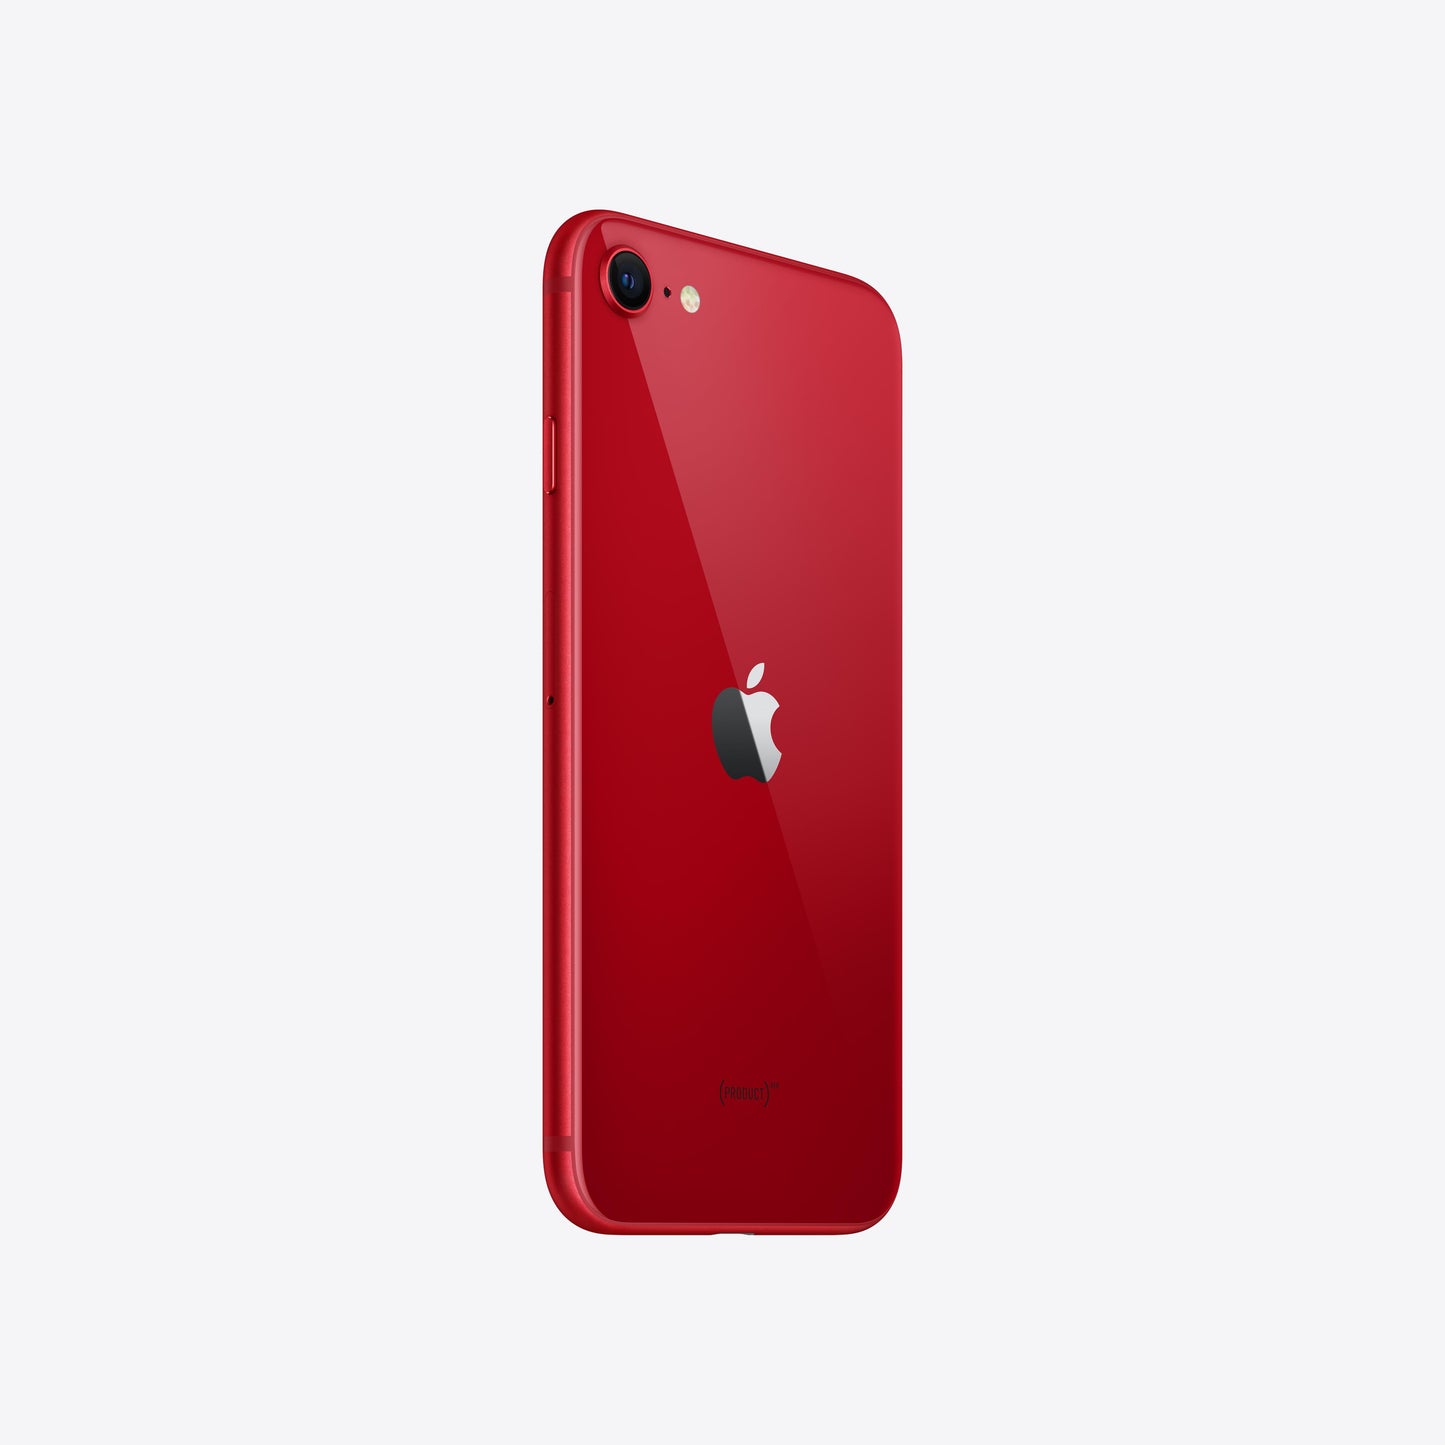 iPhone SE, 128 GB, (PRODUCT)RED